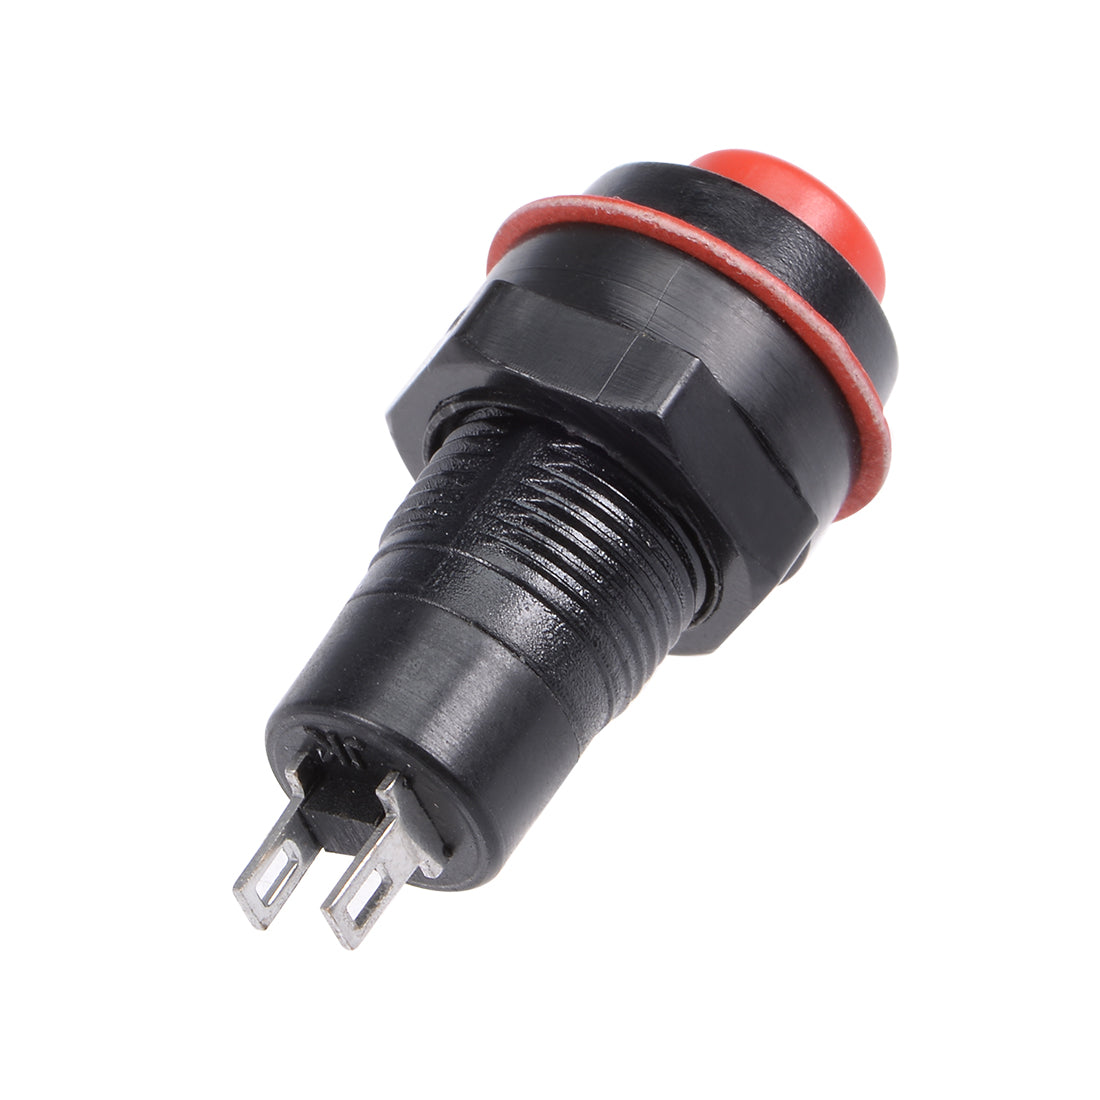 uxcell Uxcell 10pcs 10mm Momentary 2P Plastic Mini Round Push Button Switch Red SPST Nomally Open